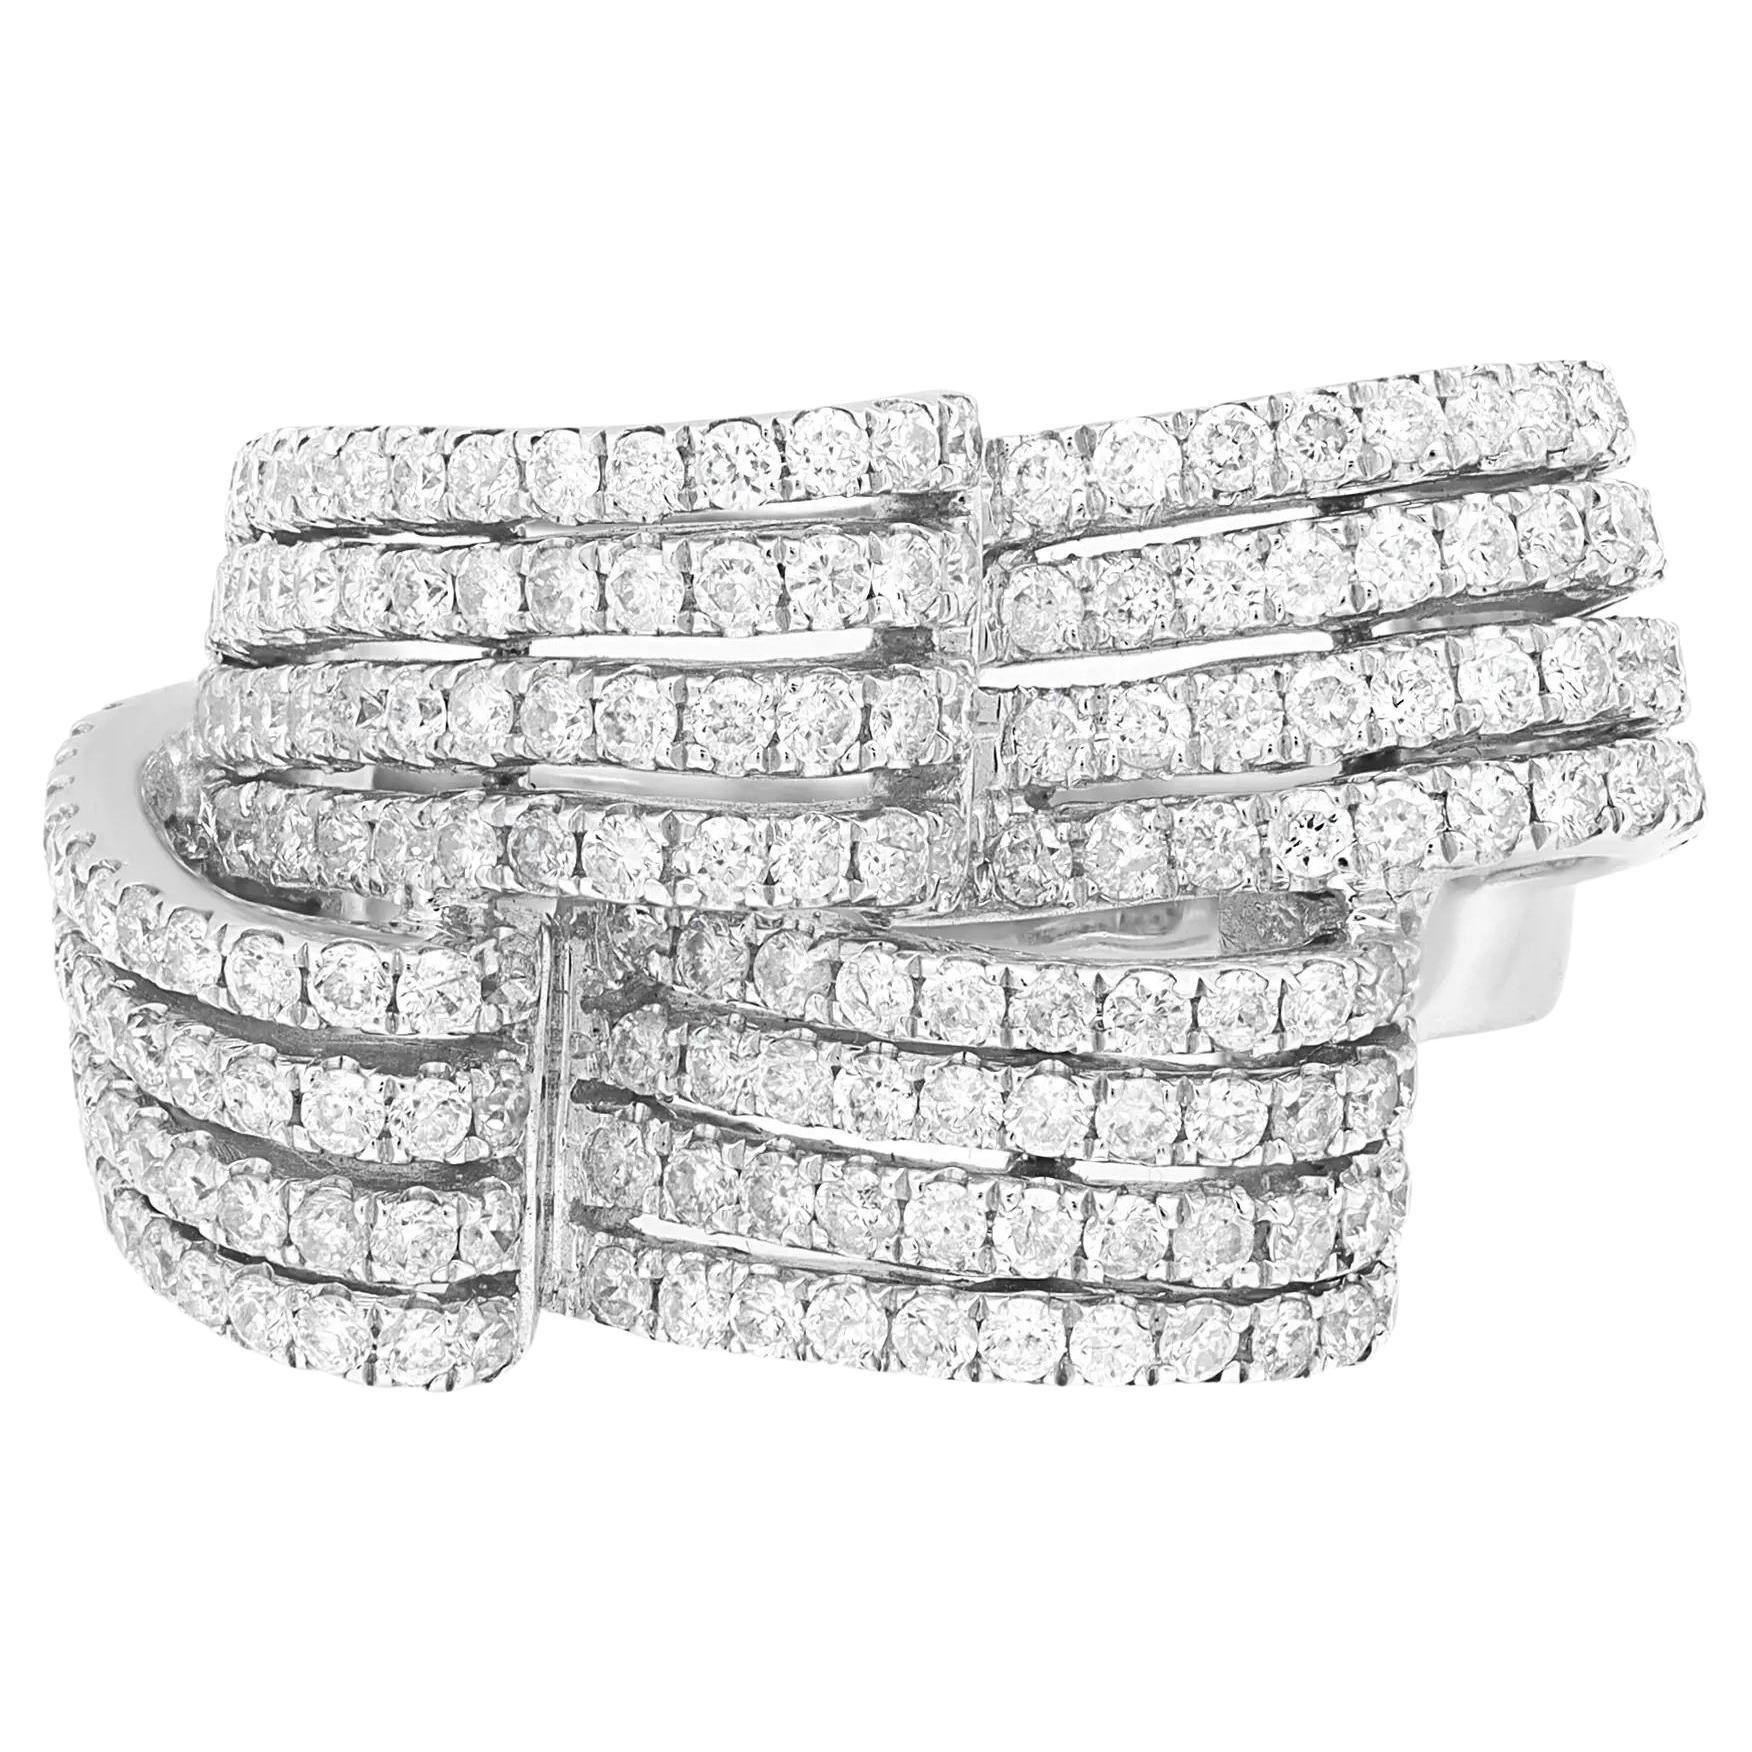 2.24cttw Round Diamond Waves Ladies Cocktail Ring 14k White Gold For Sale